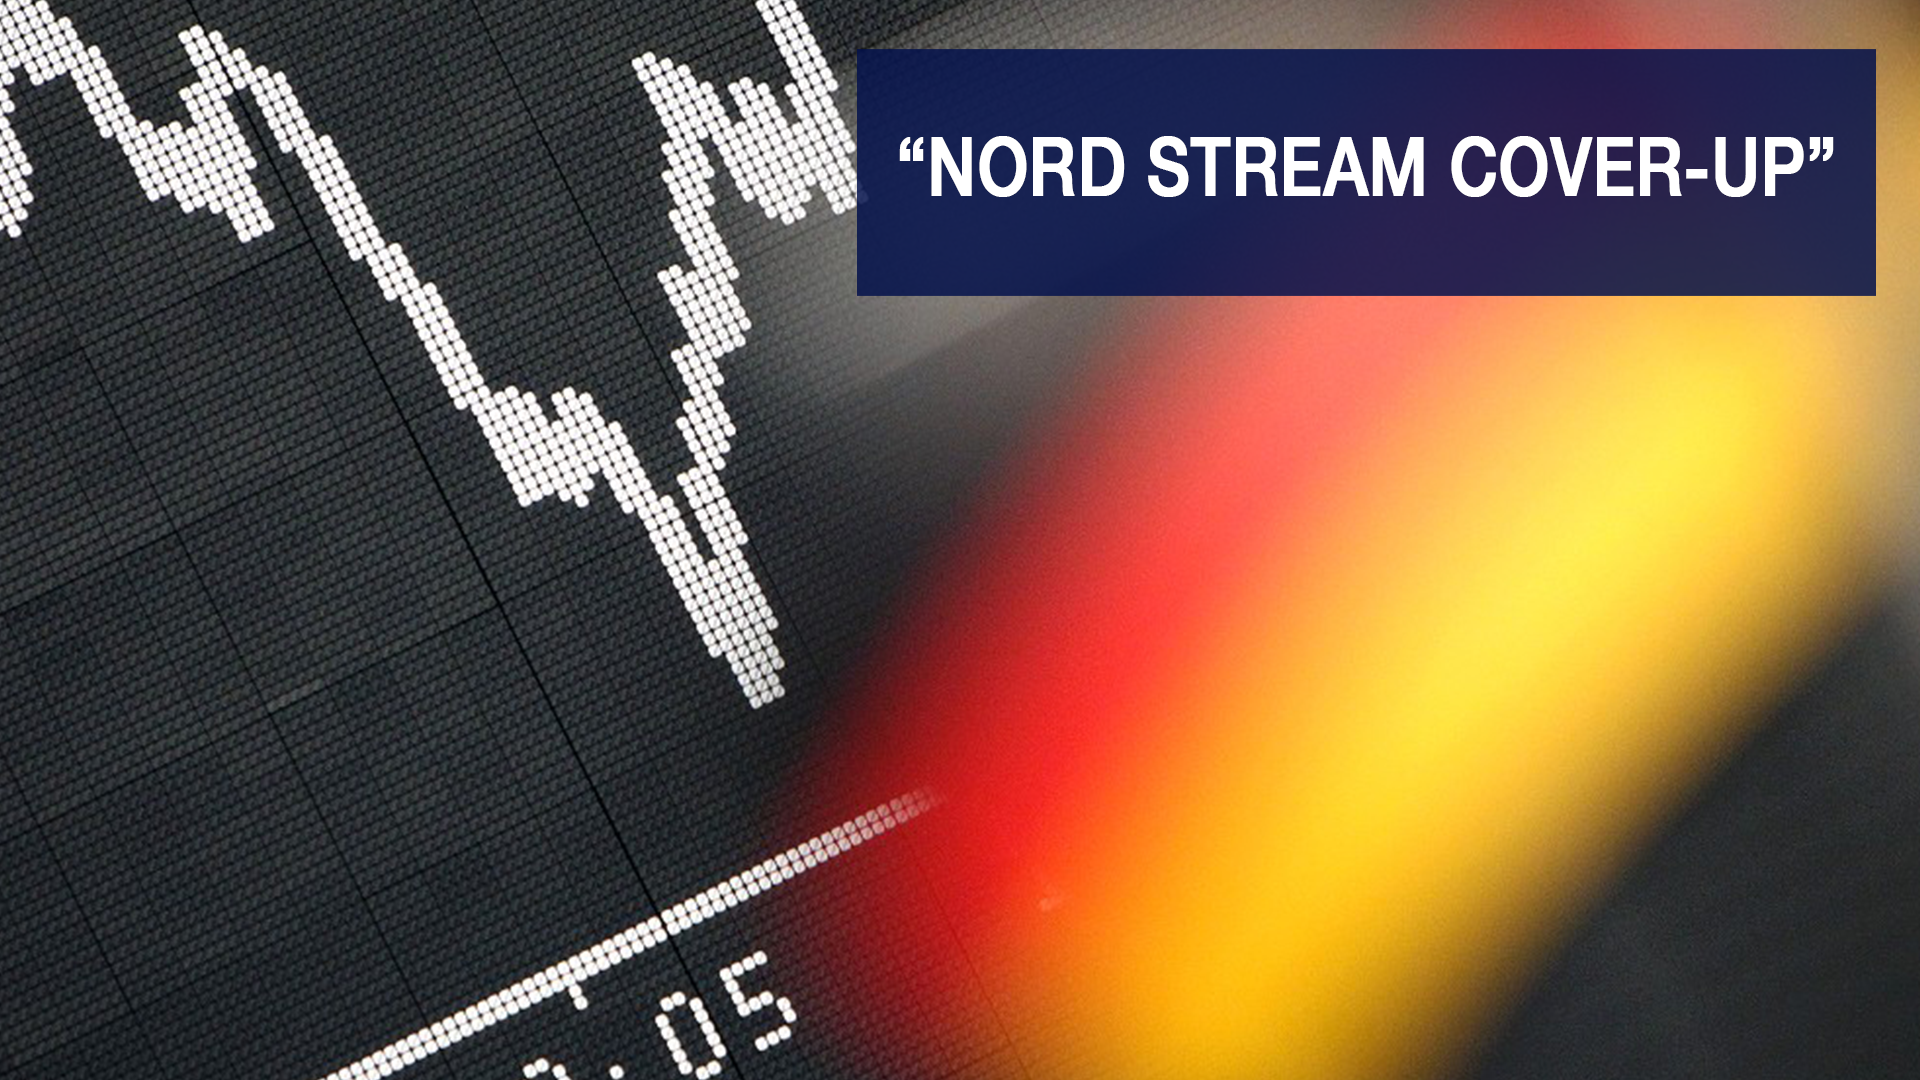 Nord stream cover-up story